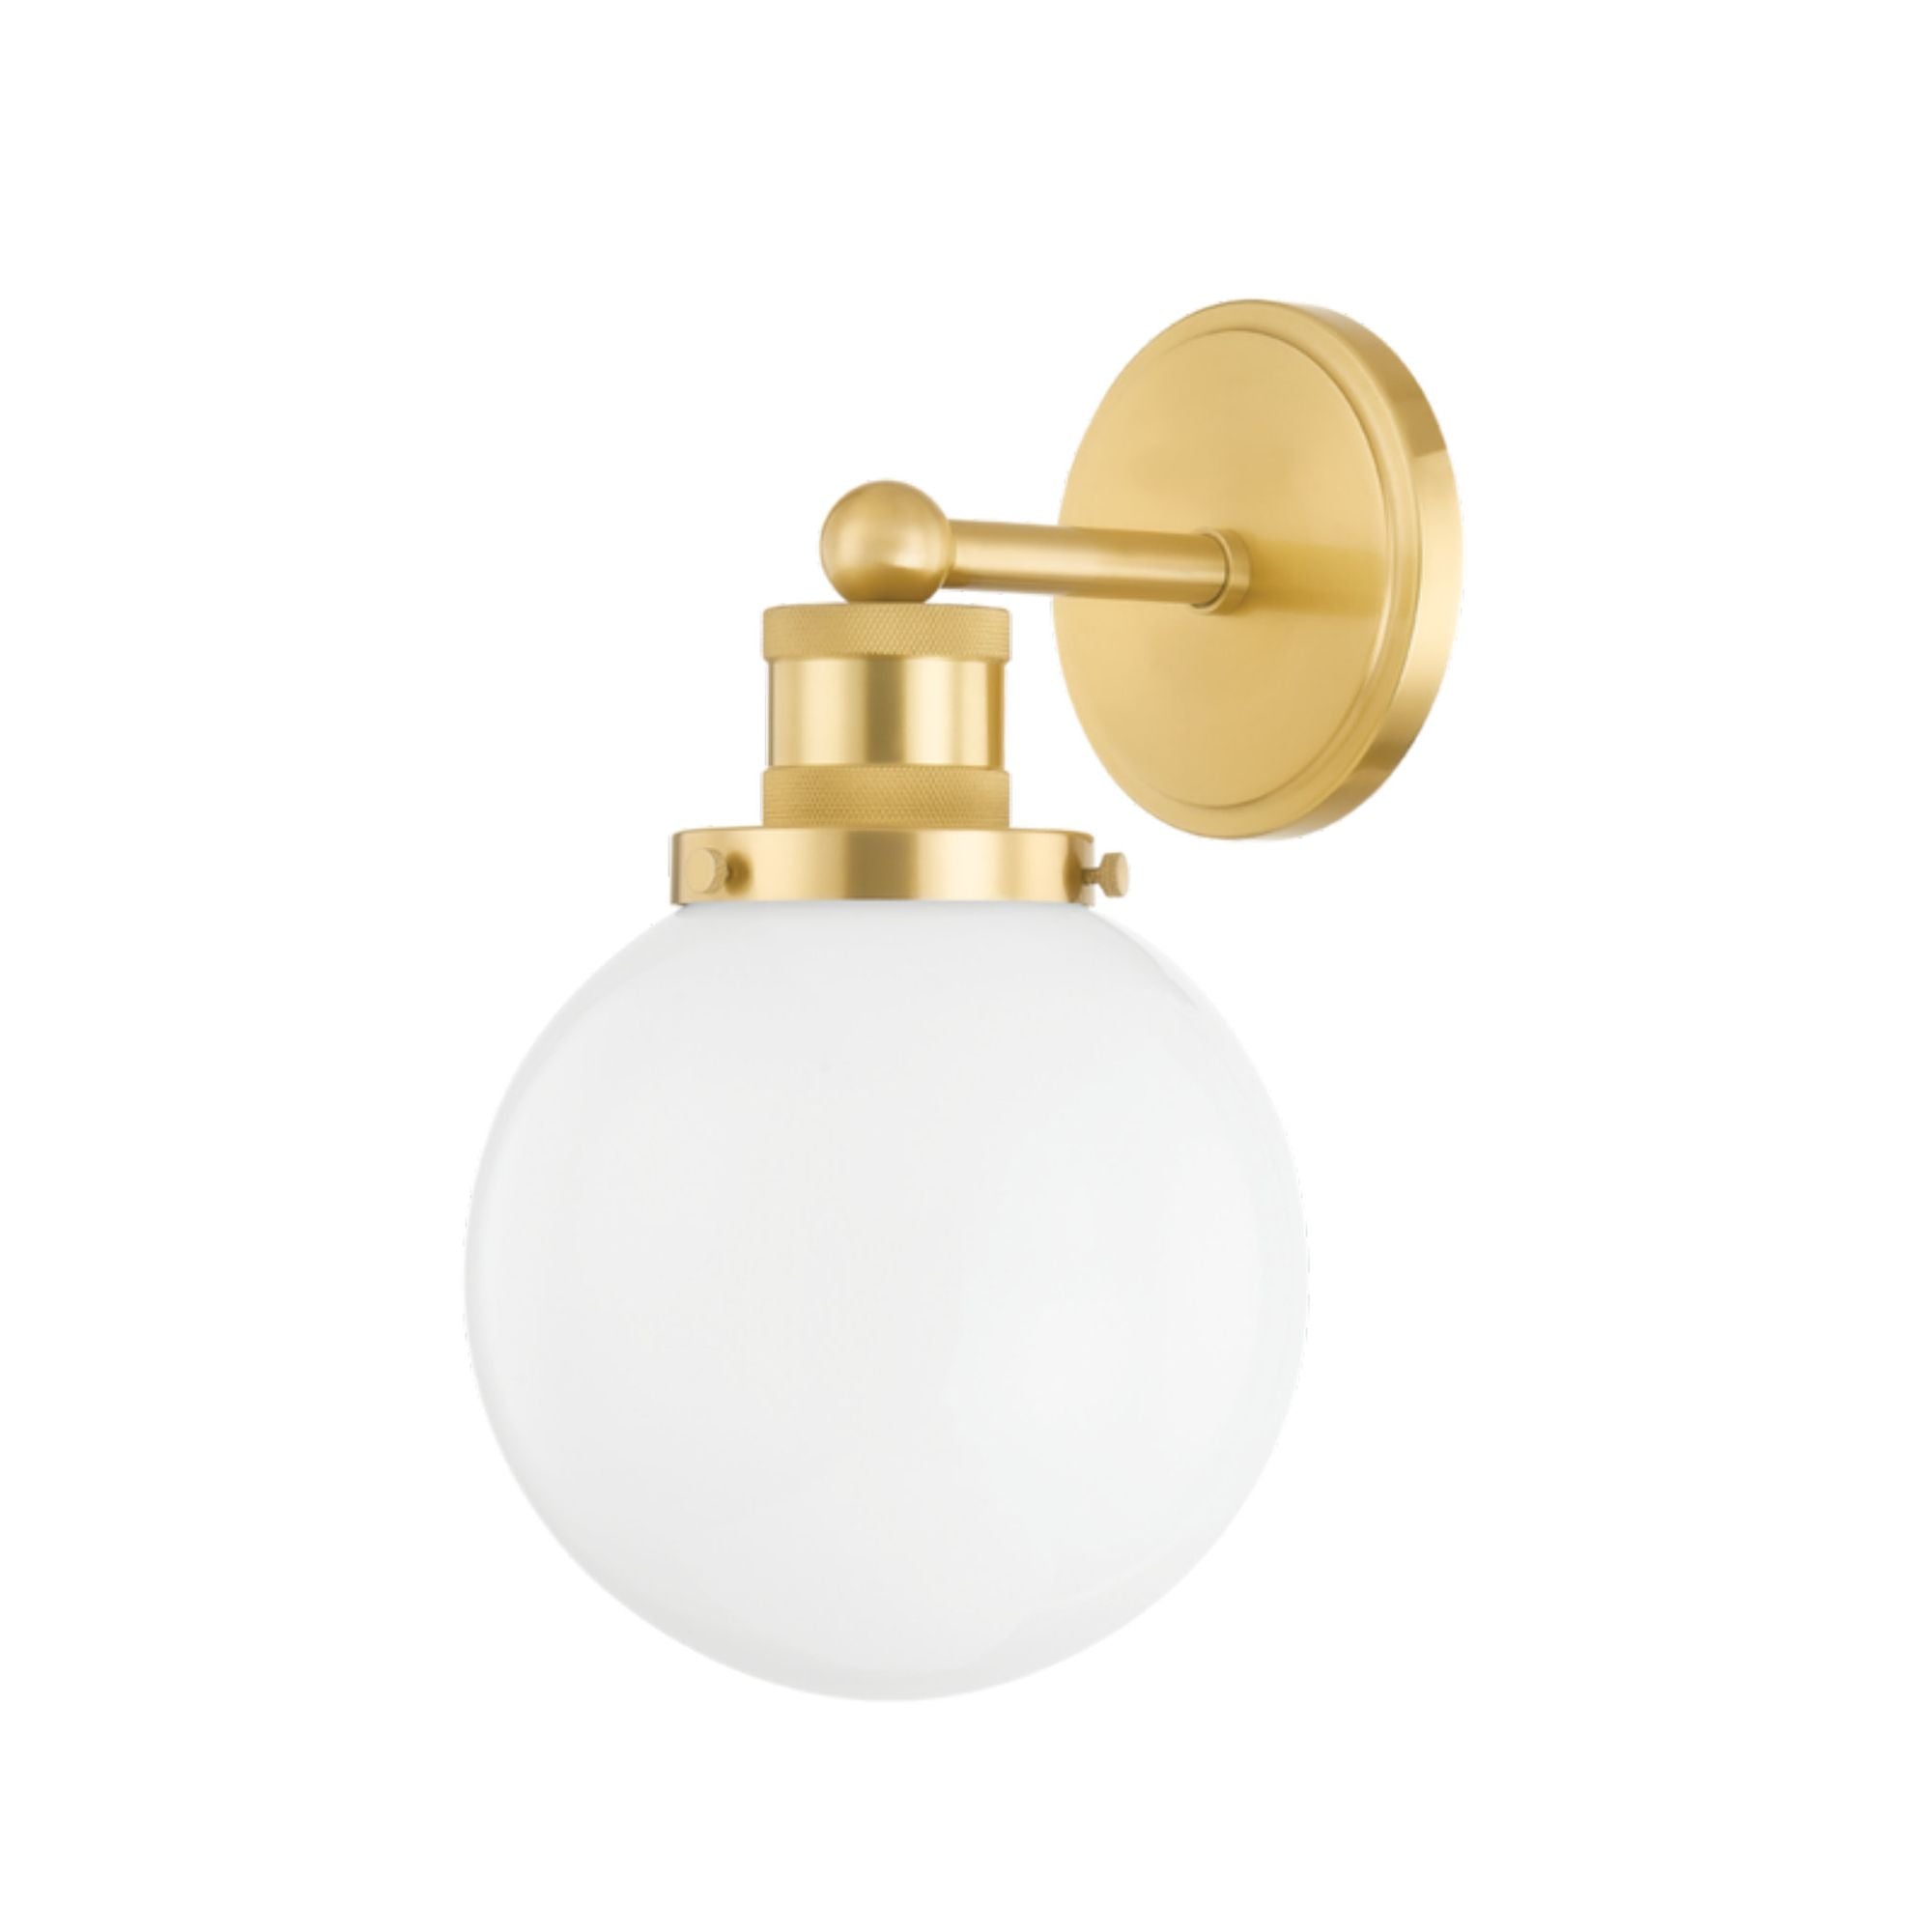 Beverly 1-Light Wall Sconce in Aged Brass by Zio & Sons